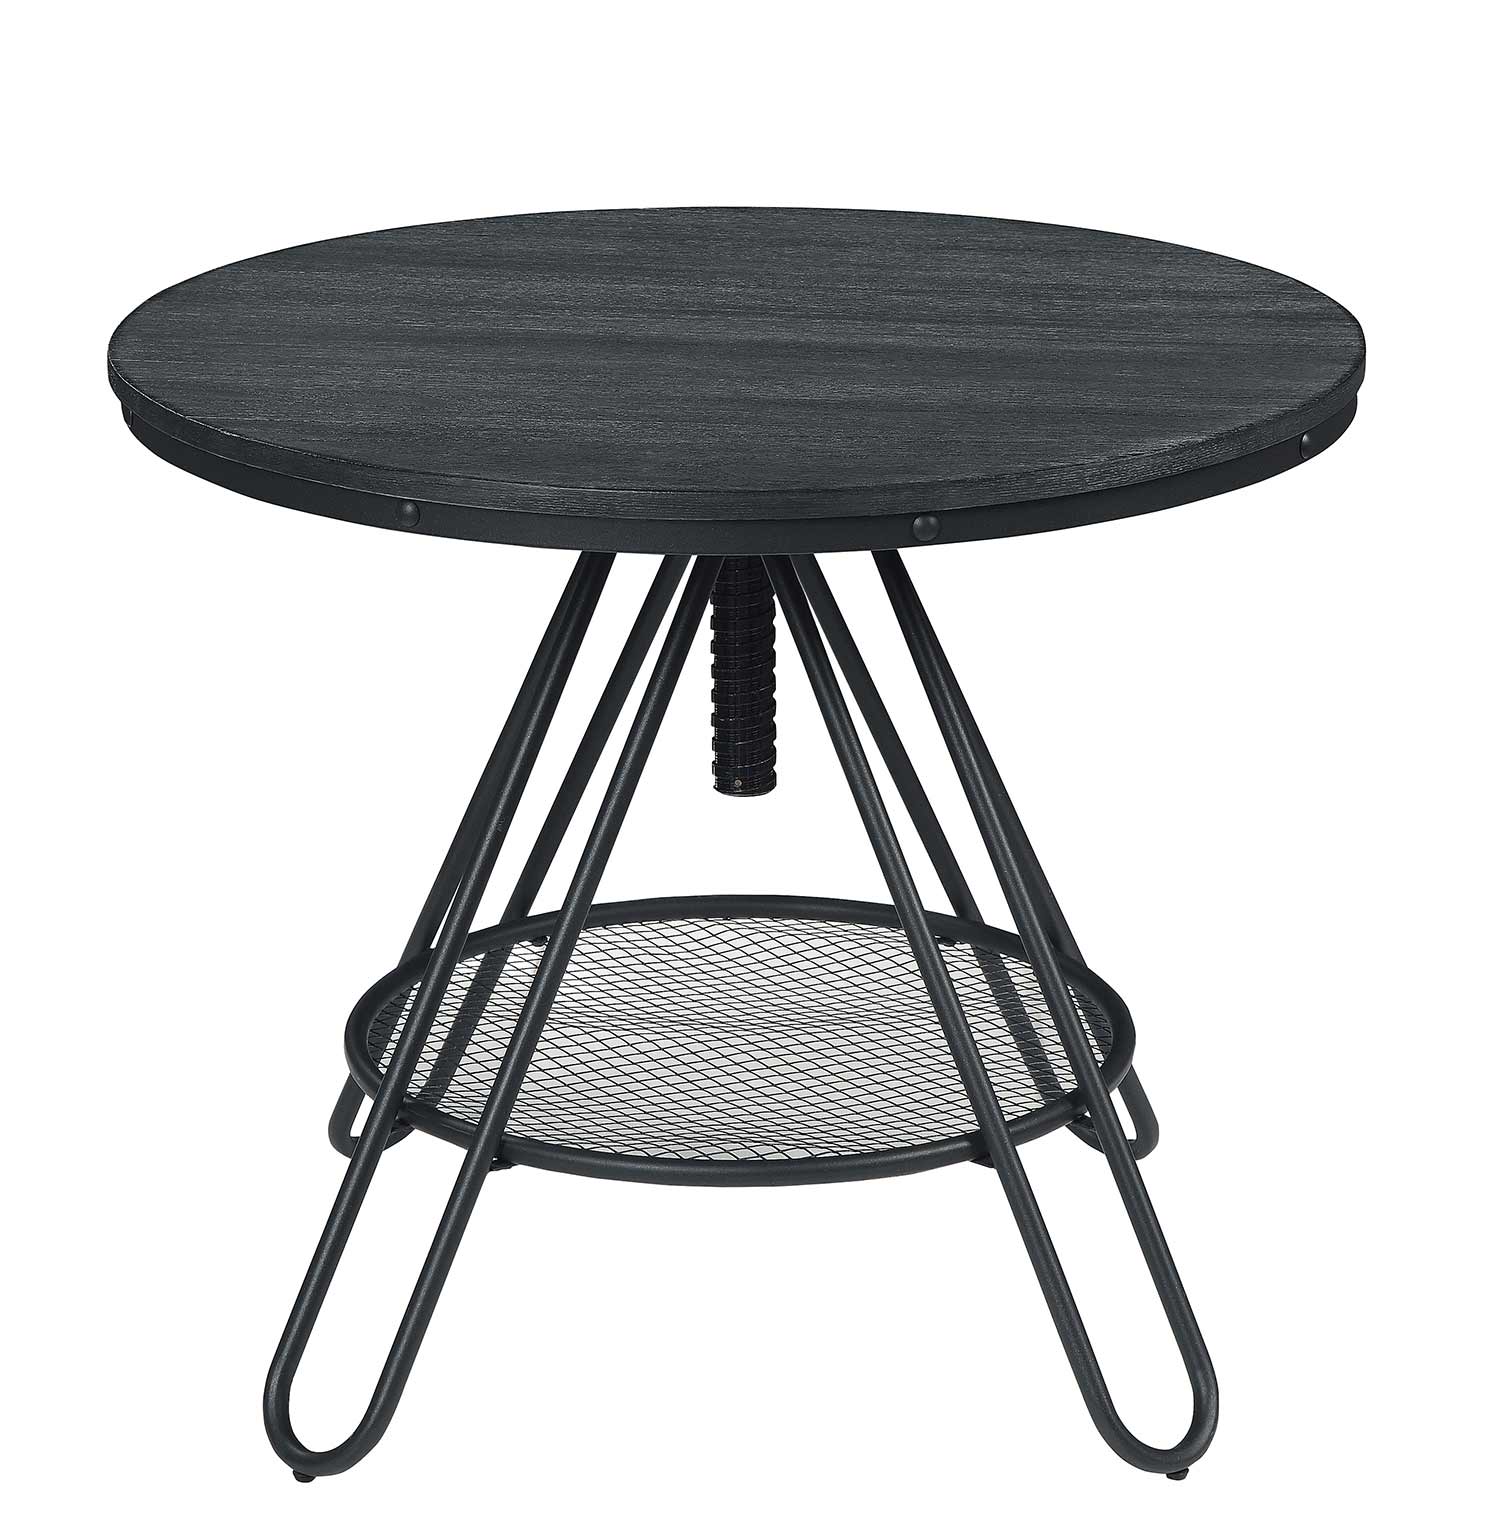 Homelegance Cirrus Adjustable Round Dining Table - Weathered Gray